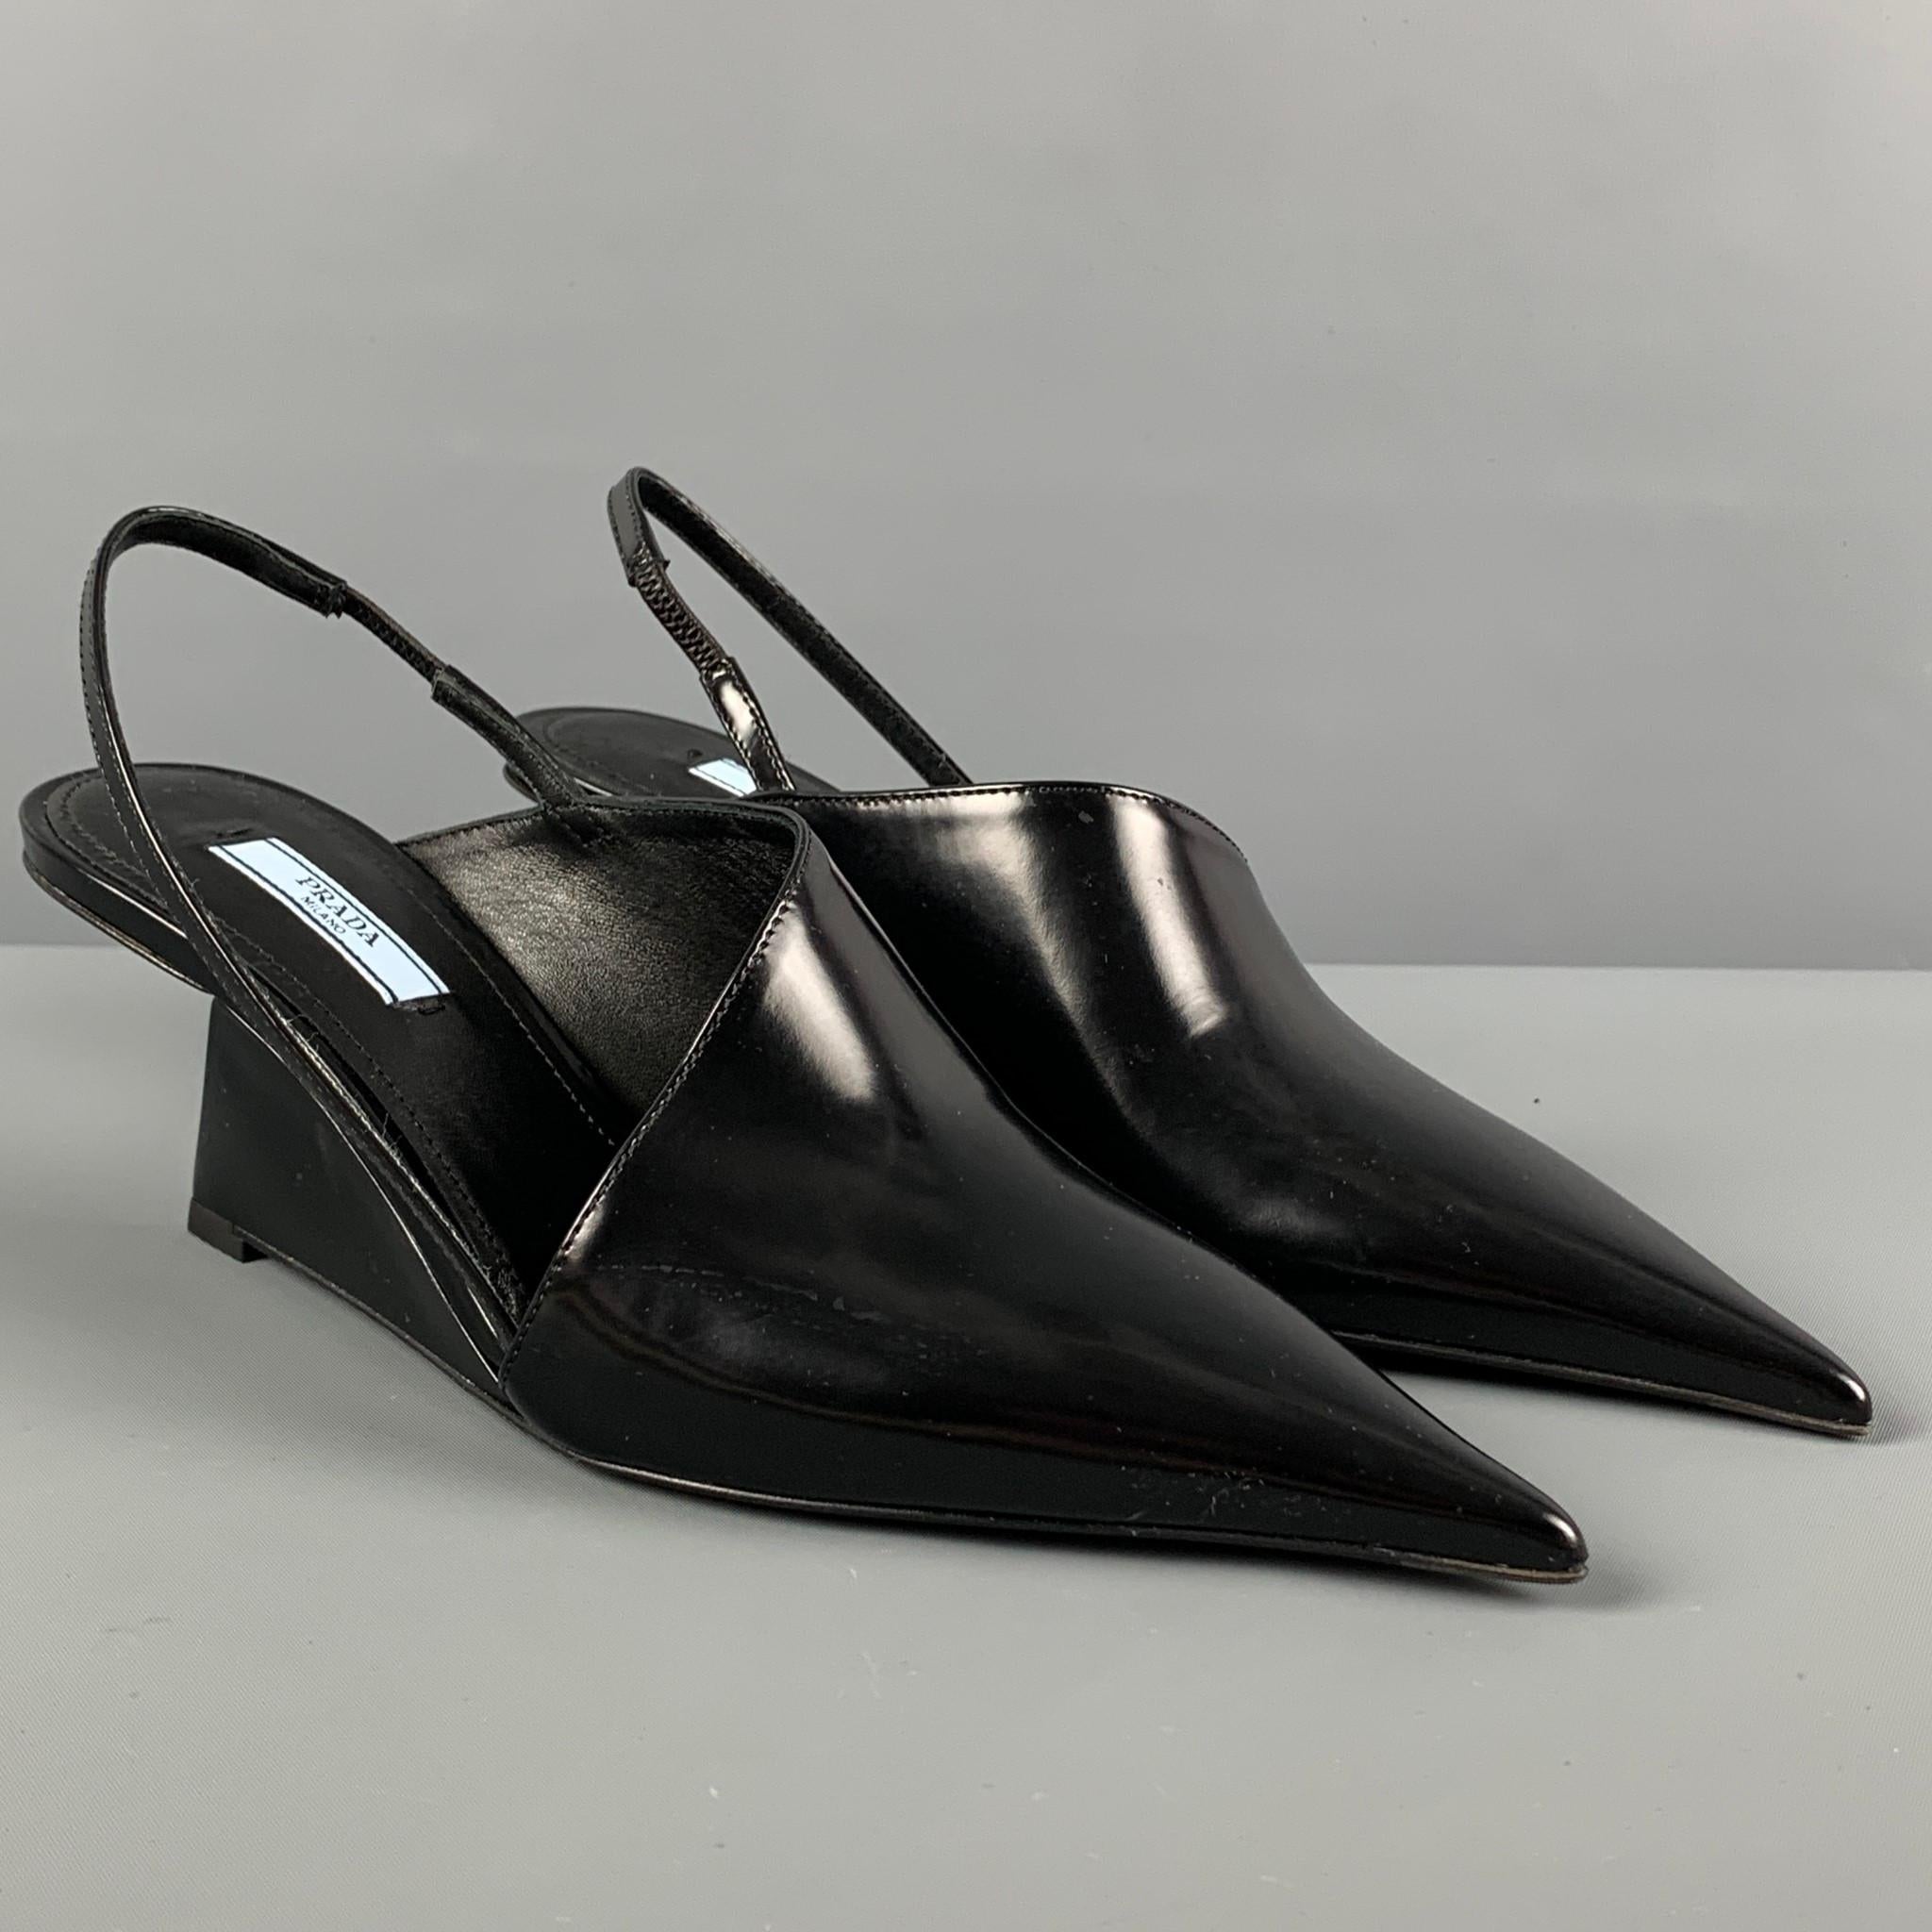 PRADA pumps comes in a black leather featuring a pointed toe, slingback detail, and a wedge heel. Made in Italy. 

New Without Tags.
Marked: 37.5
Original Retail Price: $1,250.00

Measurements:

Heel: 2.25 in. 